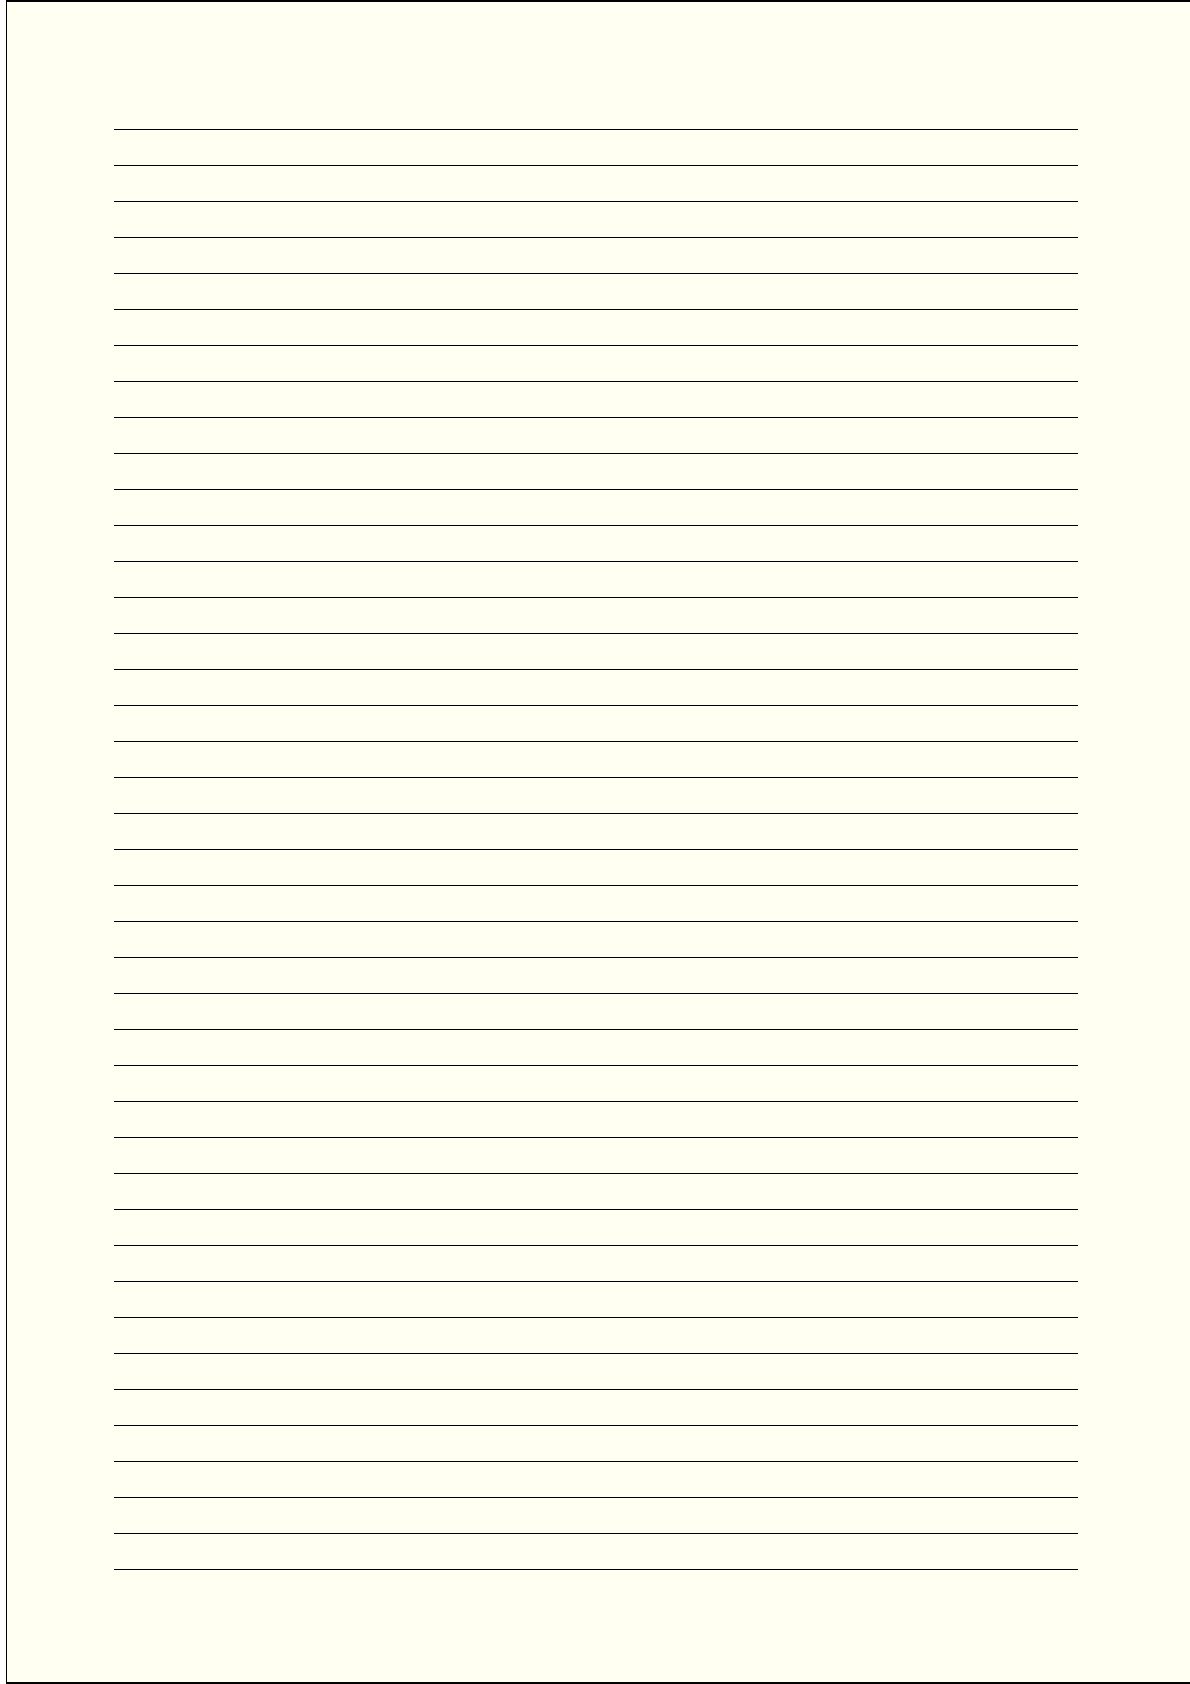 Printable Lined Paper Free A4